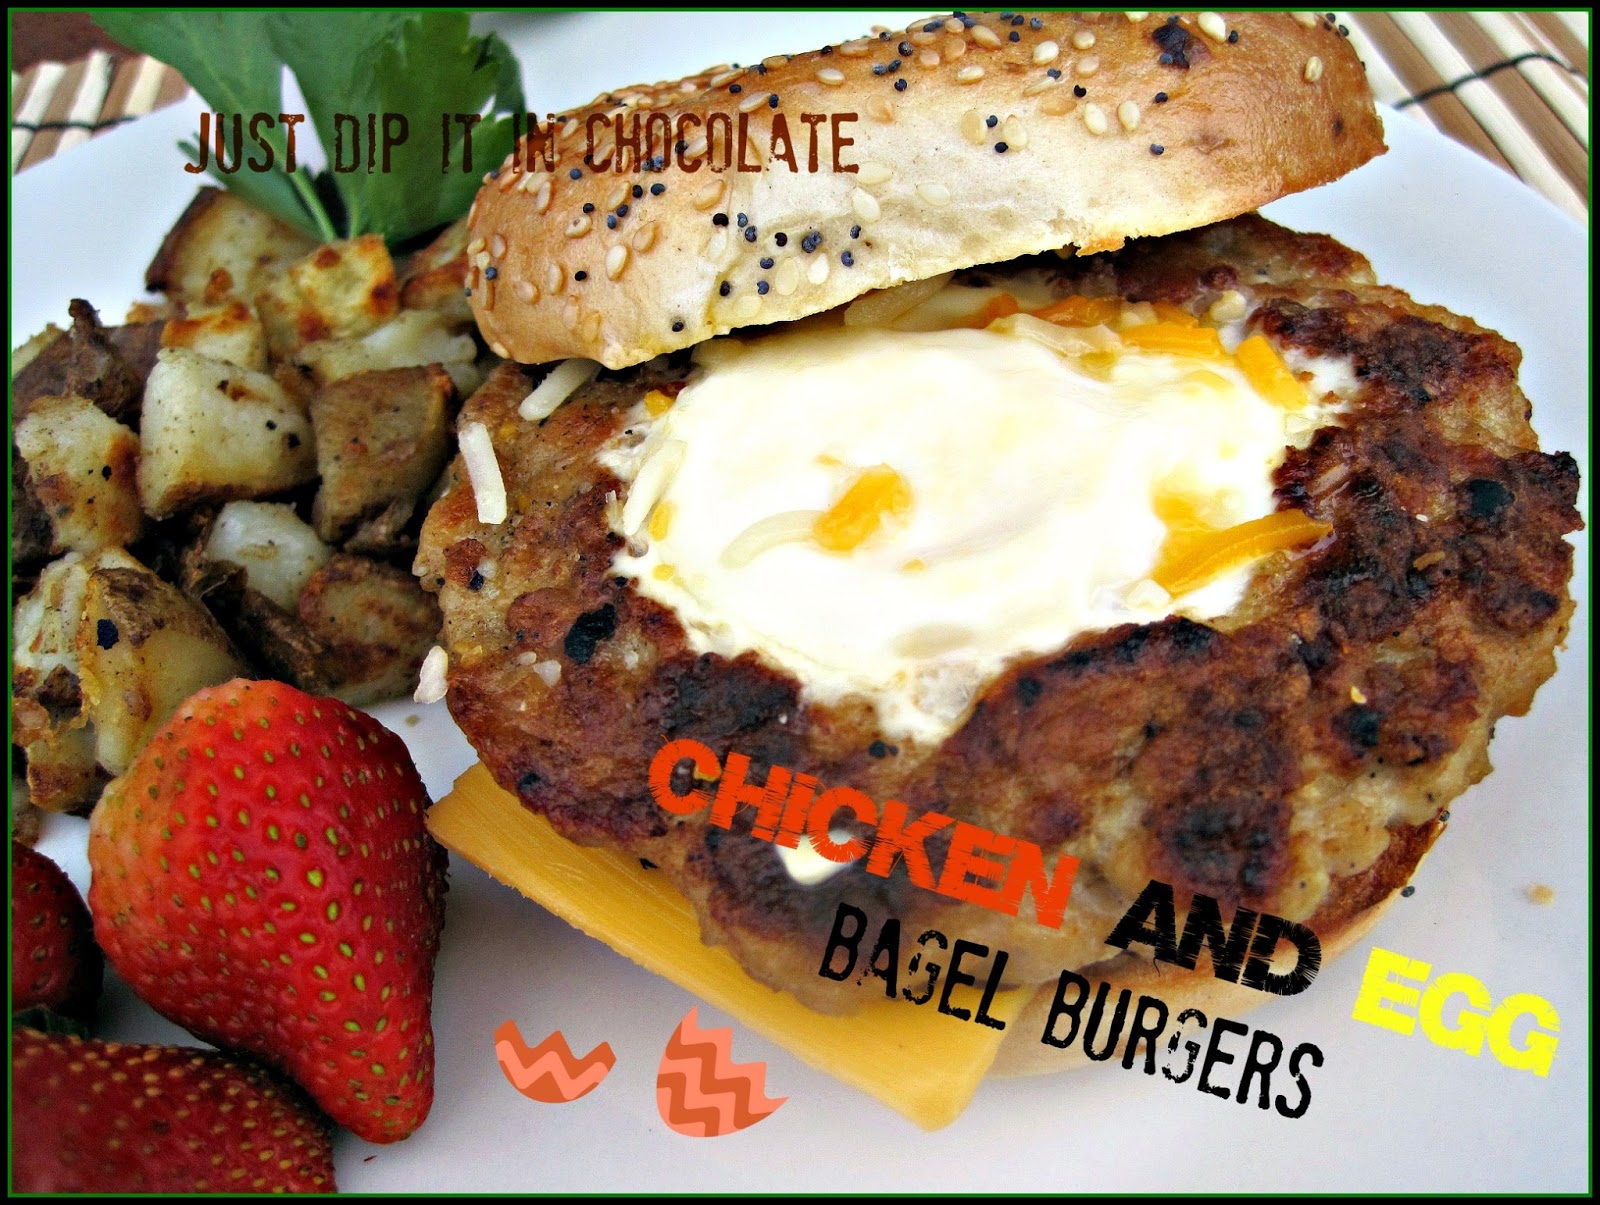 Just Dip It In Chocolate: Chicken and Egg Bagel Burgers Recipe